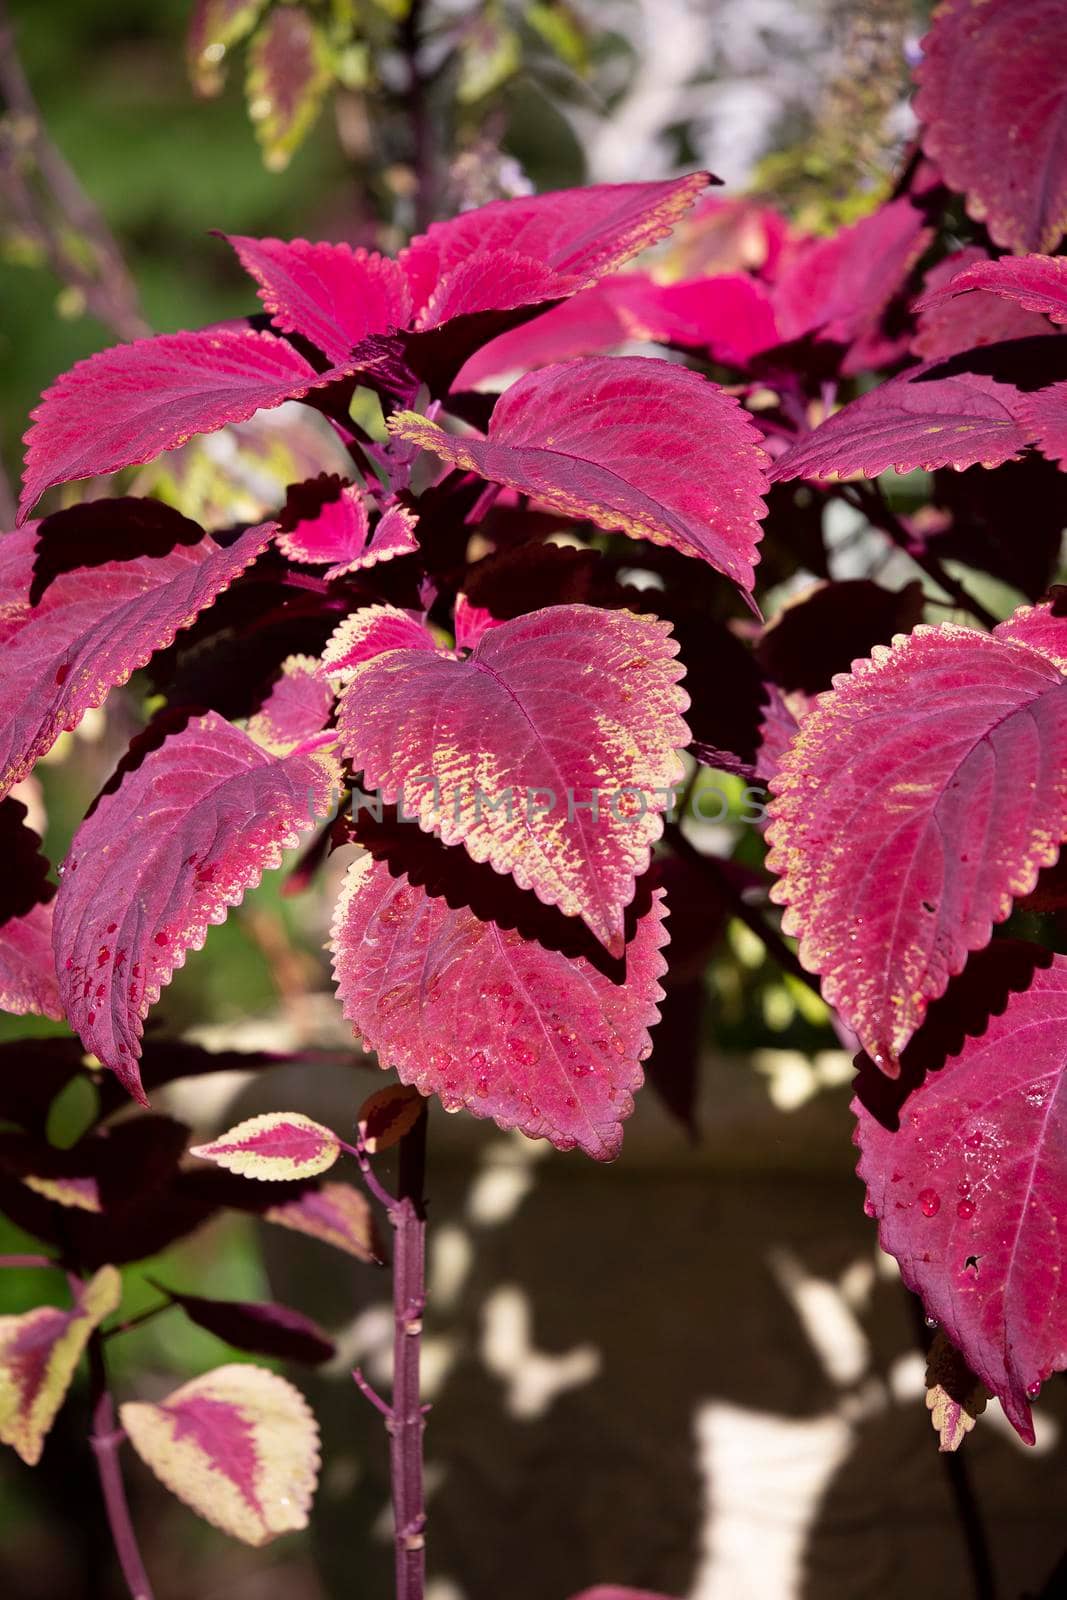 Close up of the leaves of a Coleus plant